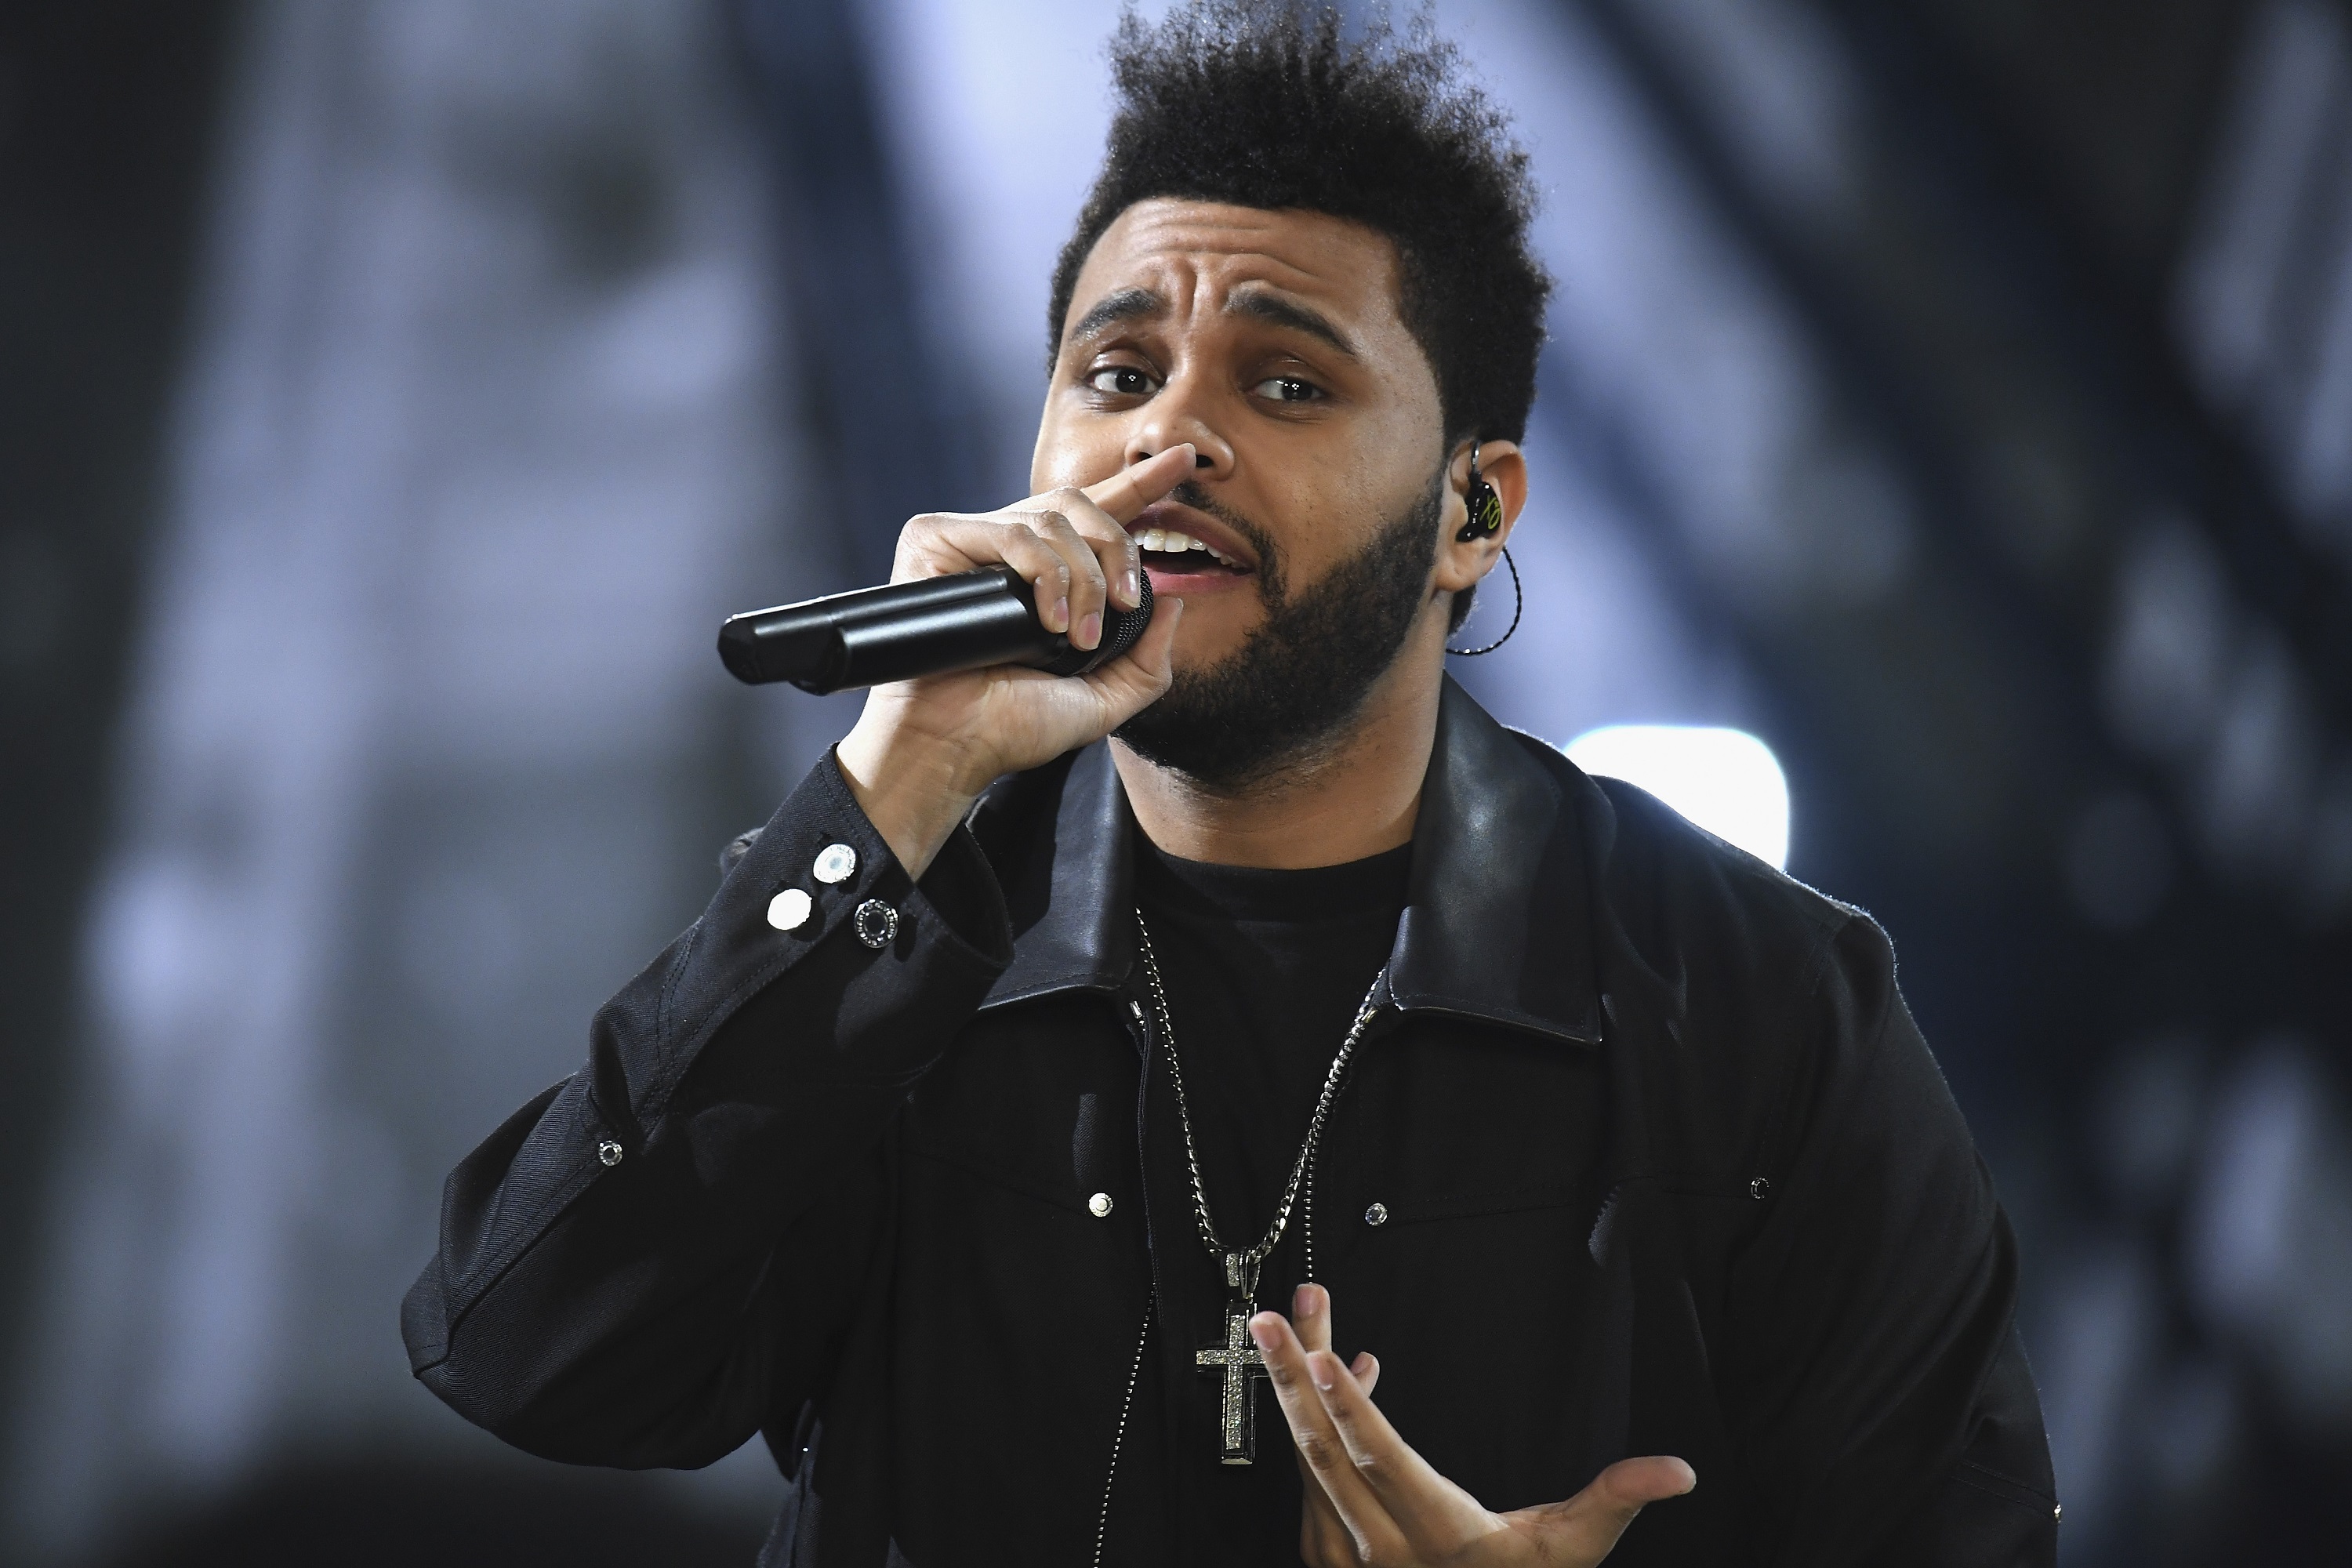 Super Bowl Halftime Show perform The Weeknd will not lip-sync